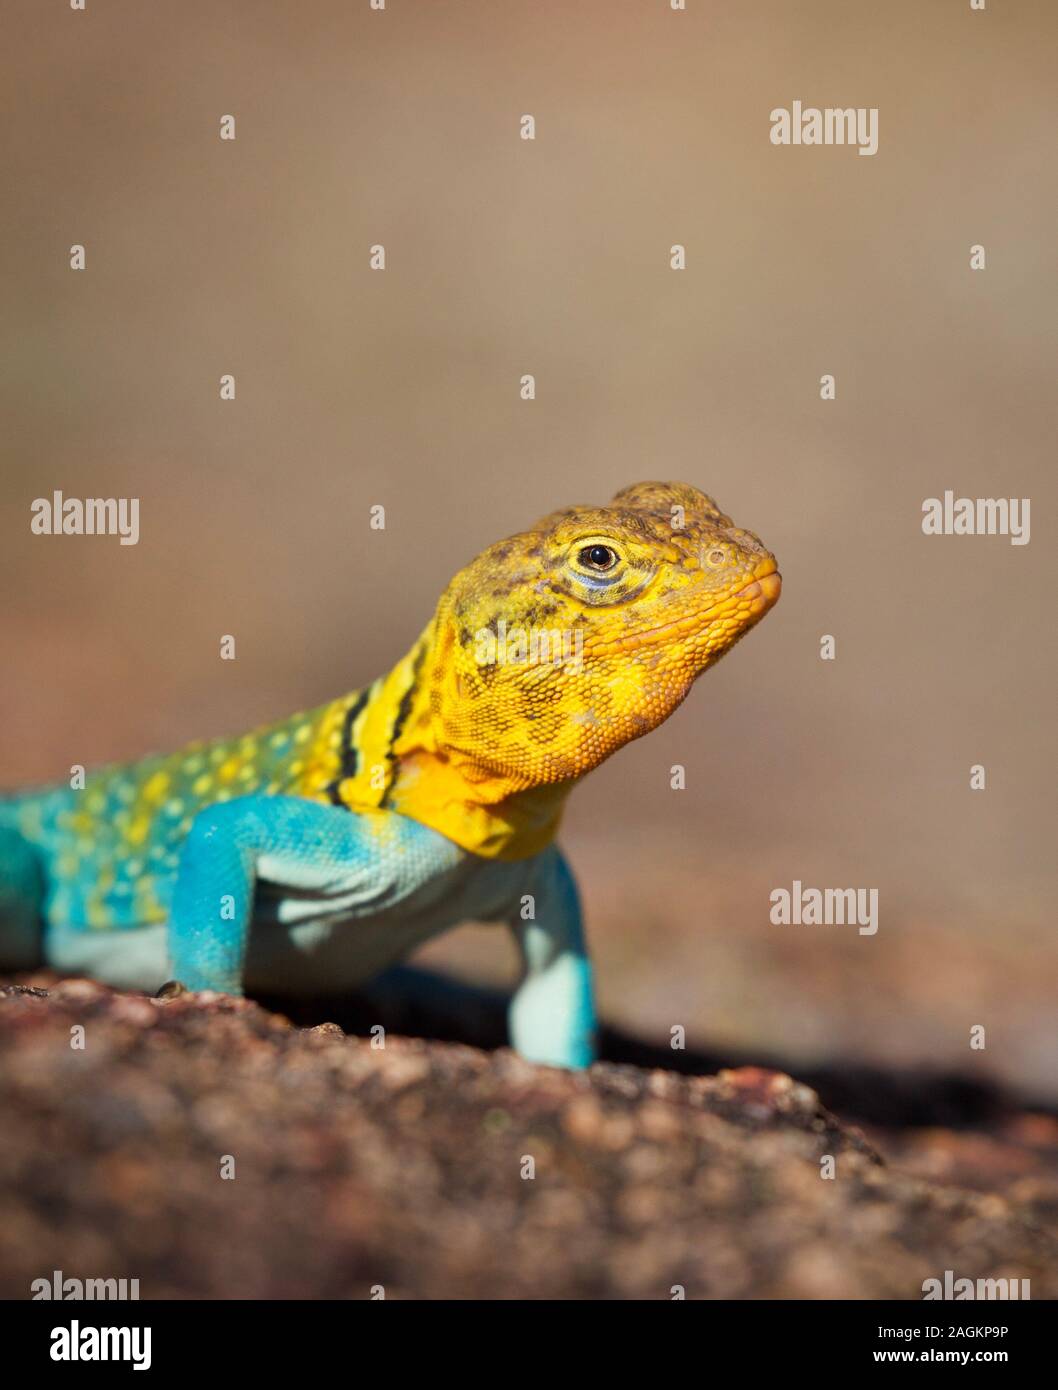 Eastern Collared Lizard, close up portrait, photographed in the wild.  This is a wild Lizard, not a pet. Stock Photo